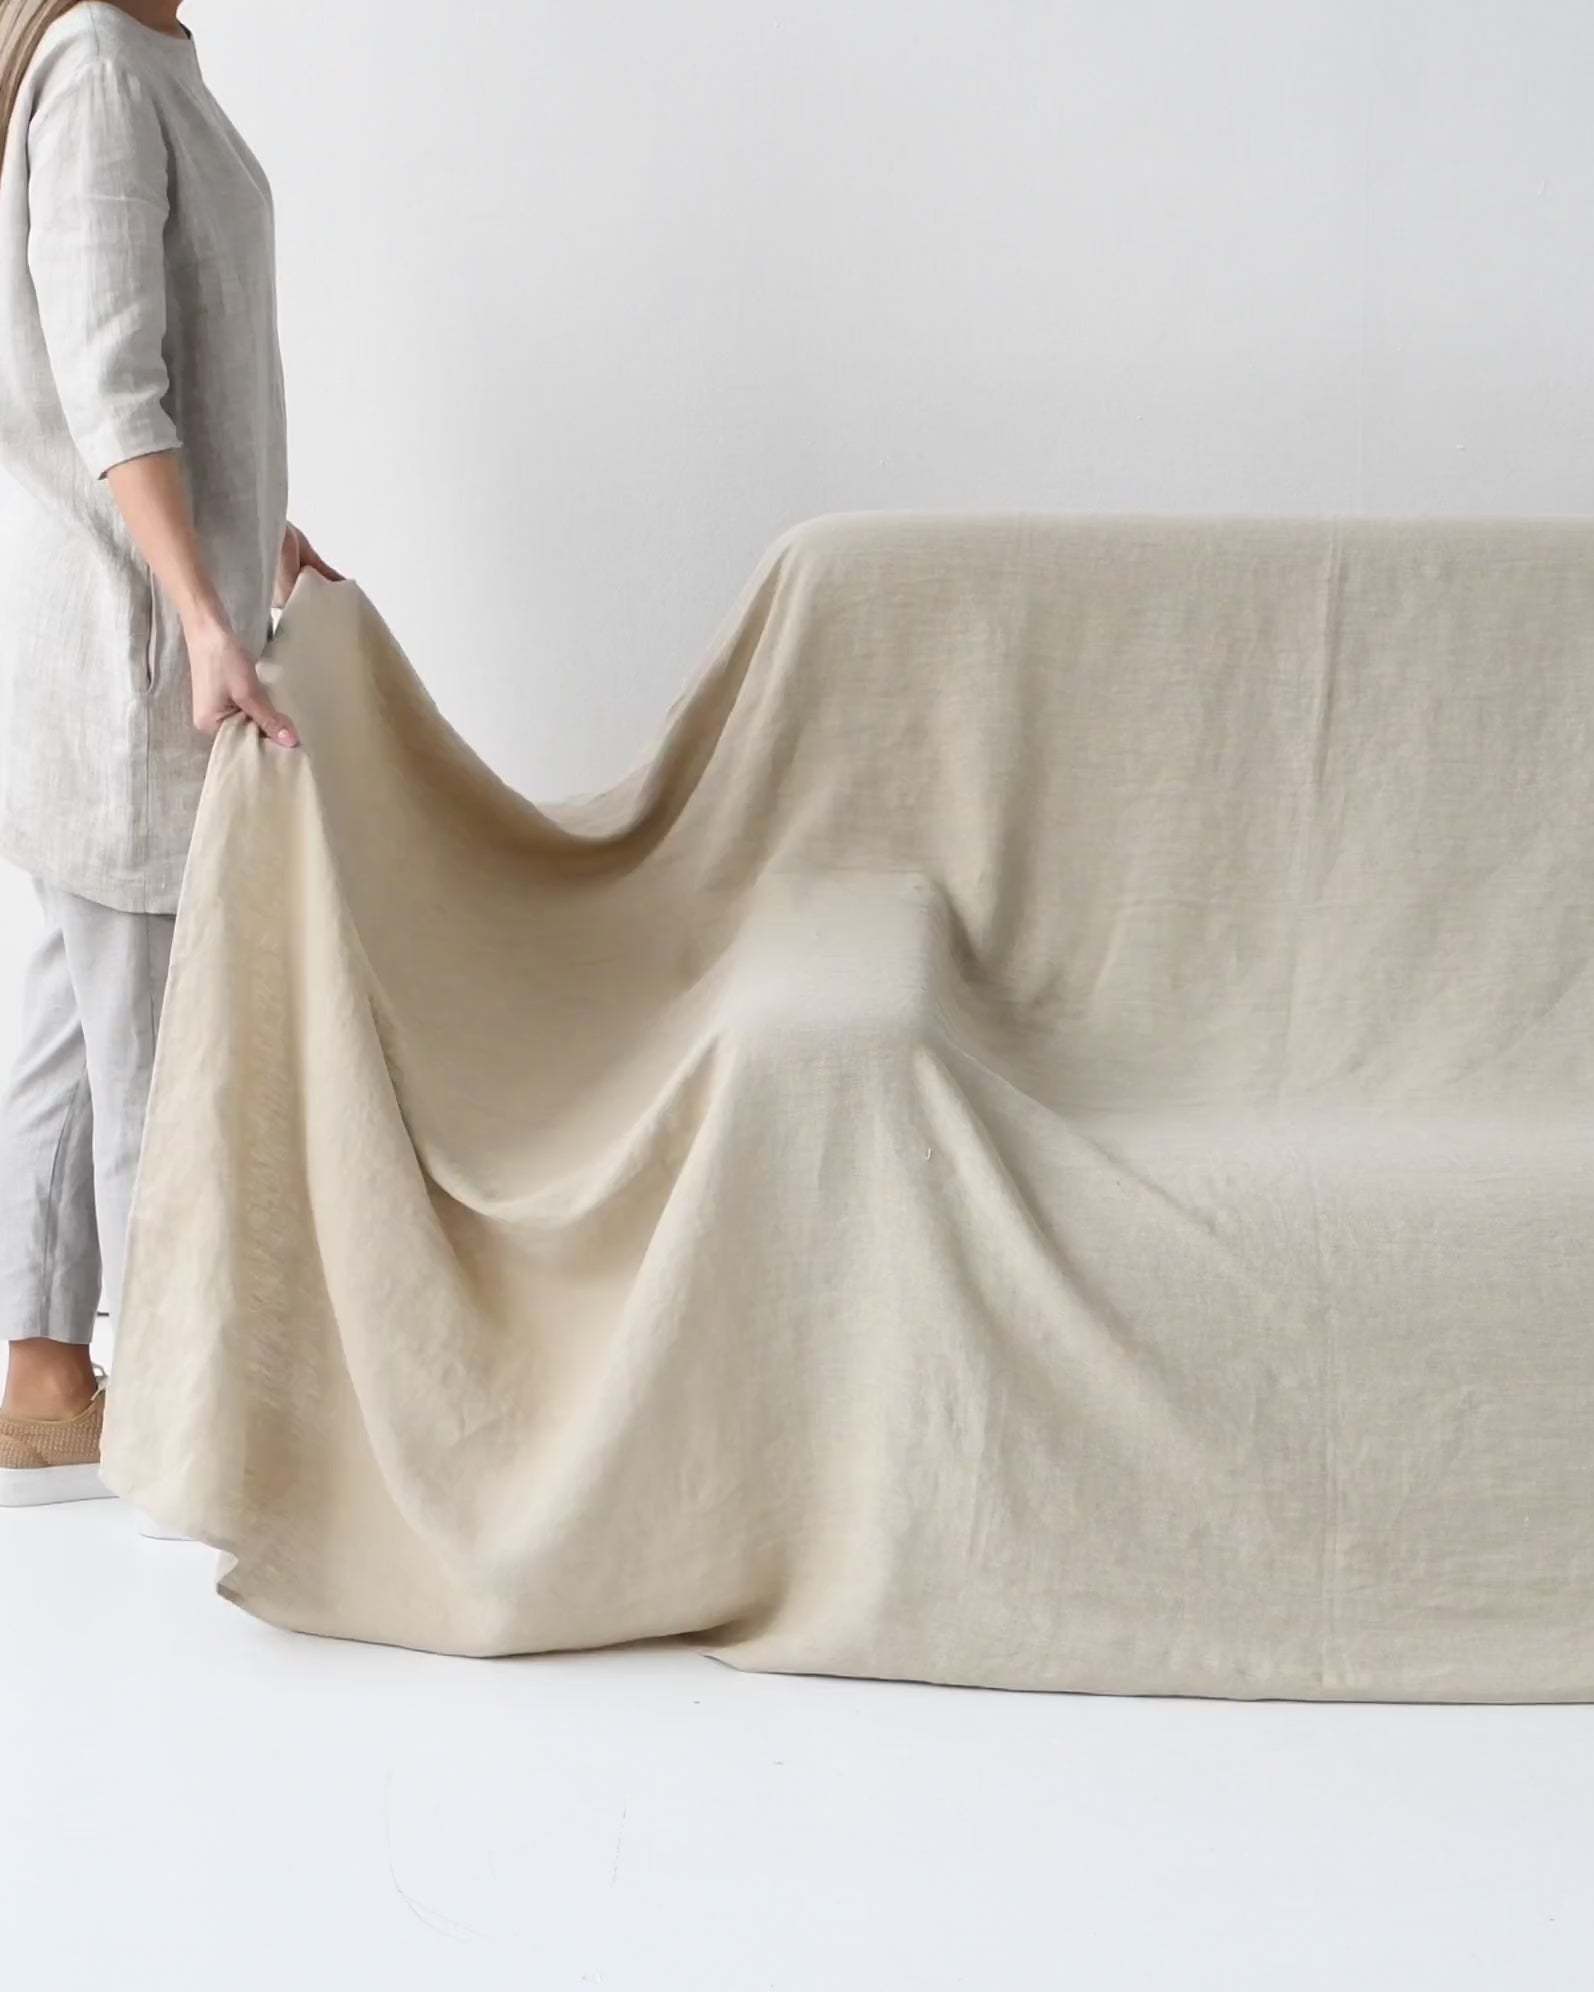 Linen couch cover in Natural - MagicLinen